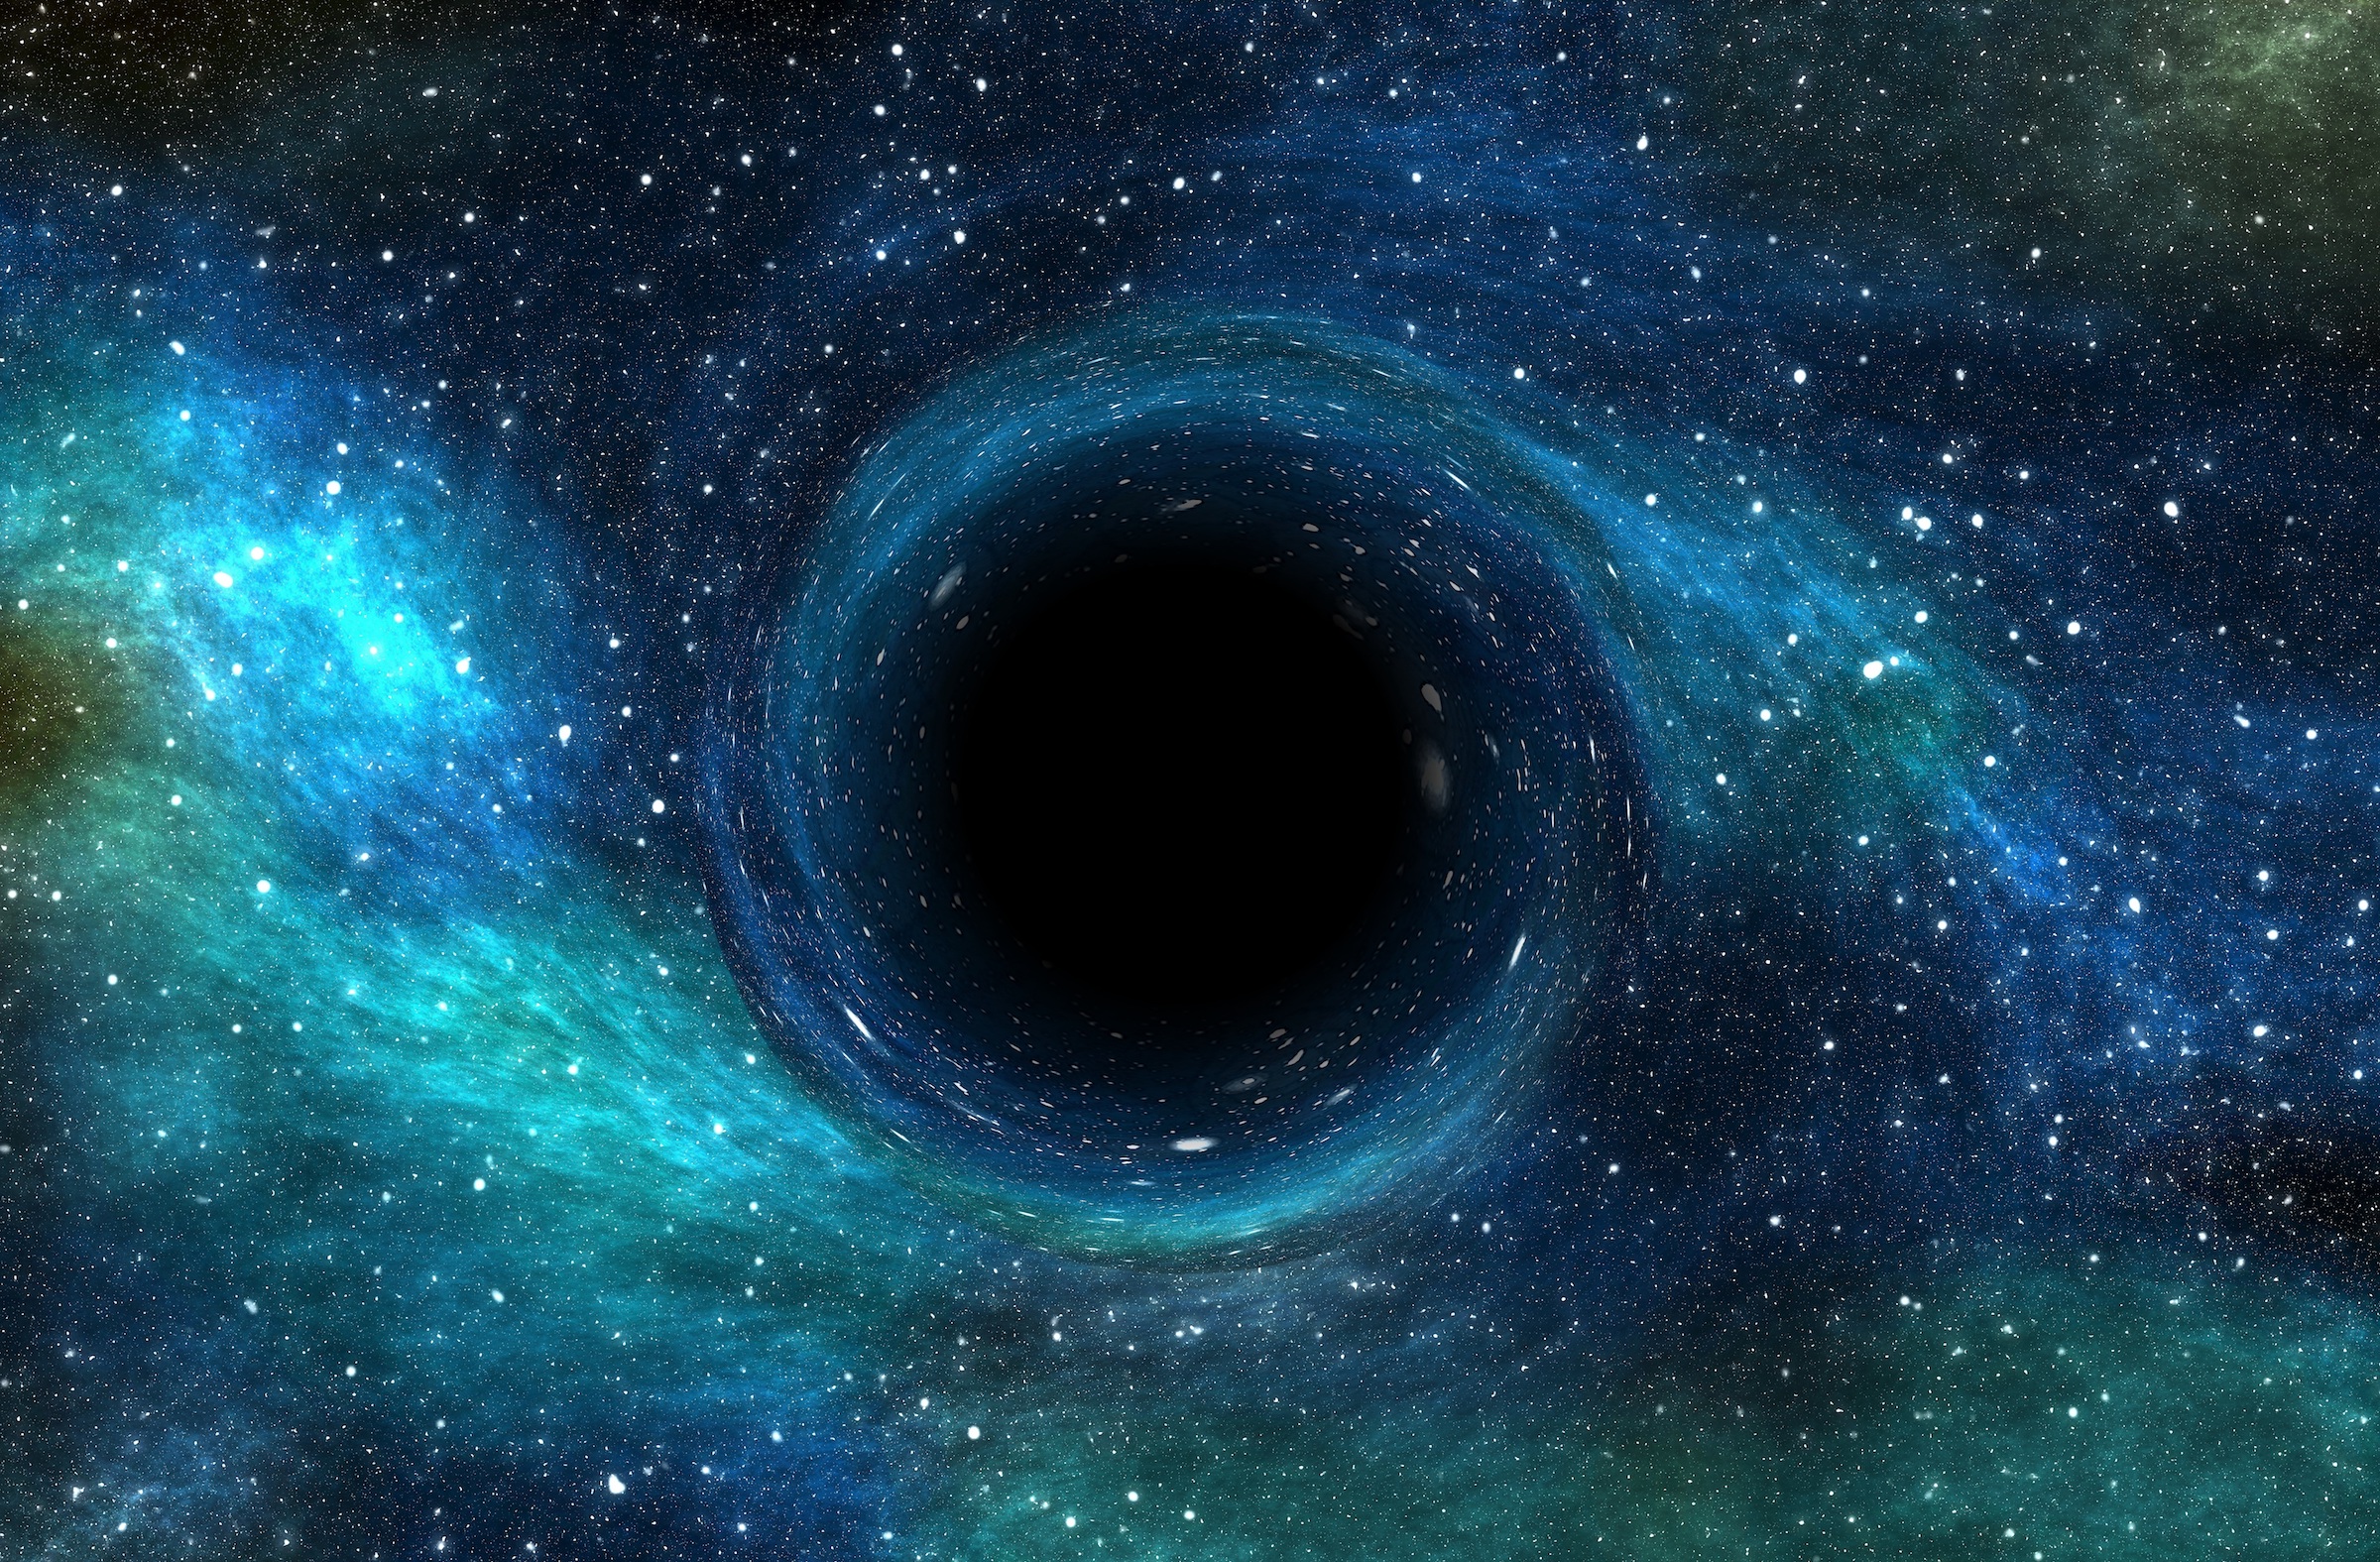 Swarms of 'primordial' black holes might fill our universe | Live Science